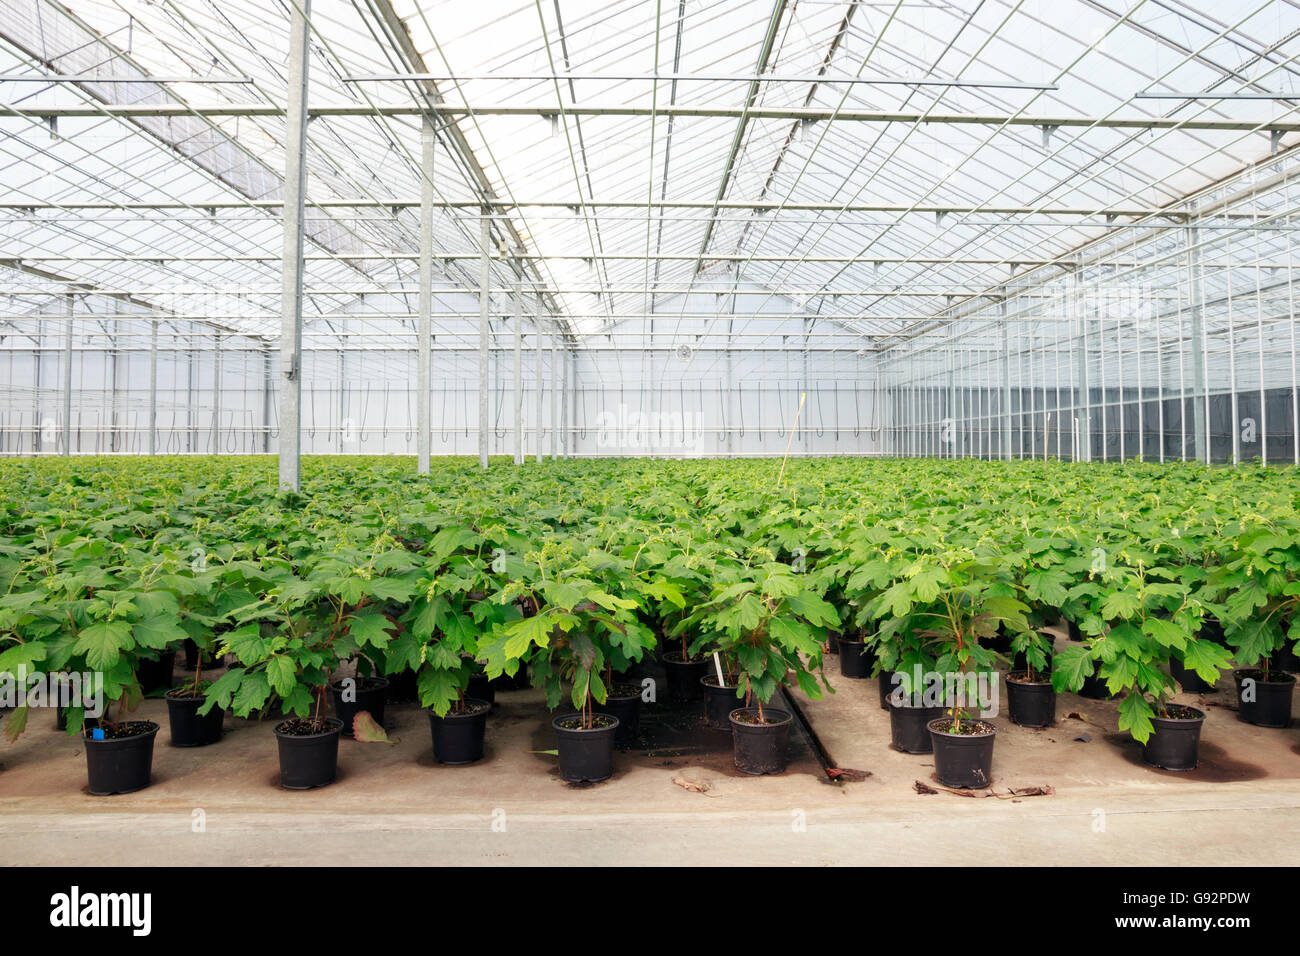 Greenhouse cultivation Stock Photo